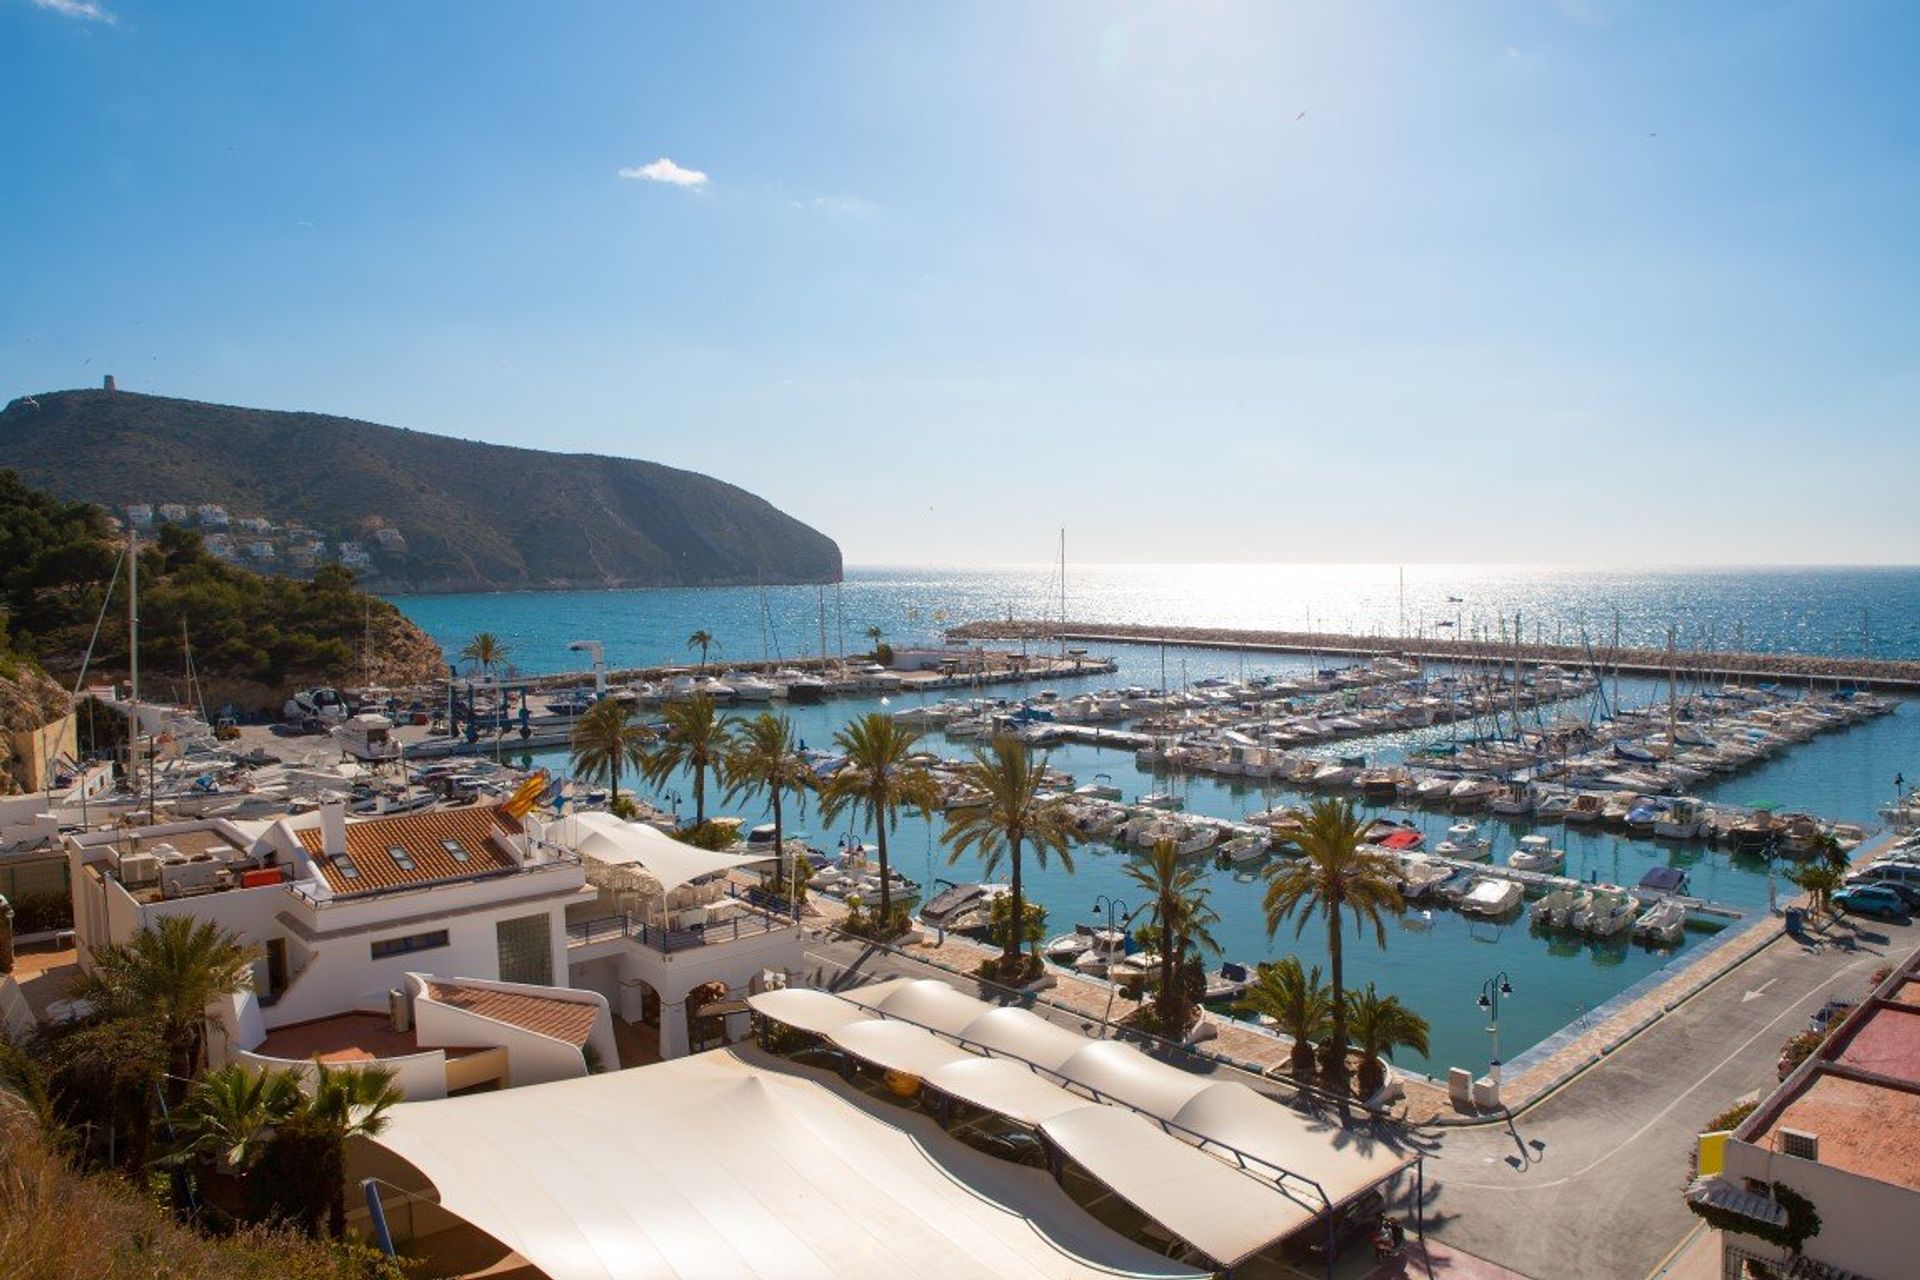 The beautiful sports marina with Penon de Ifach Natural Park, in the distance